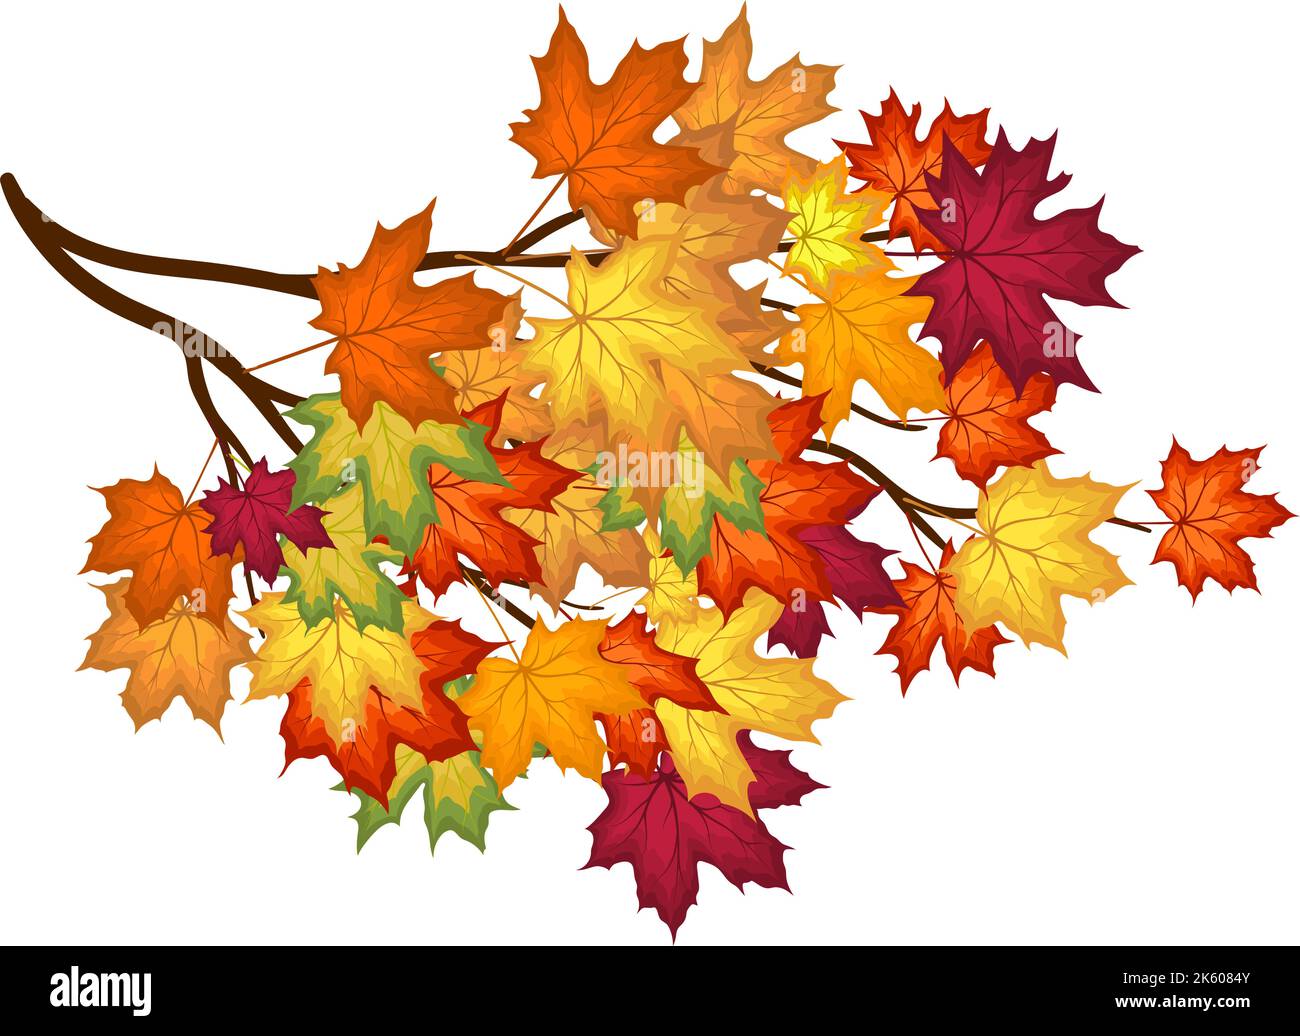 Autumn Frame With Blowing Maple Leaves Over White Background. Elegant ...